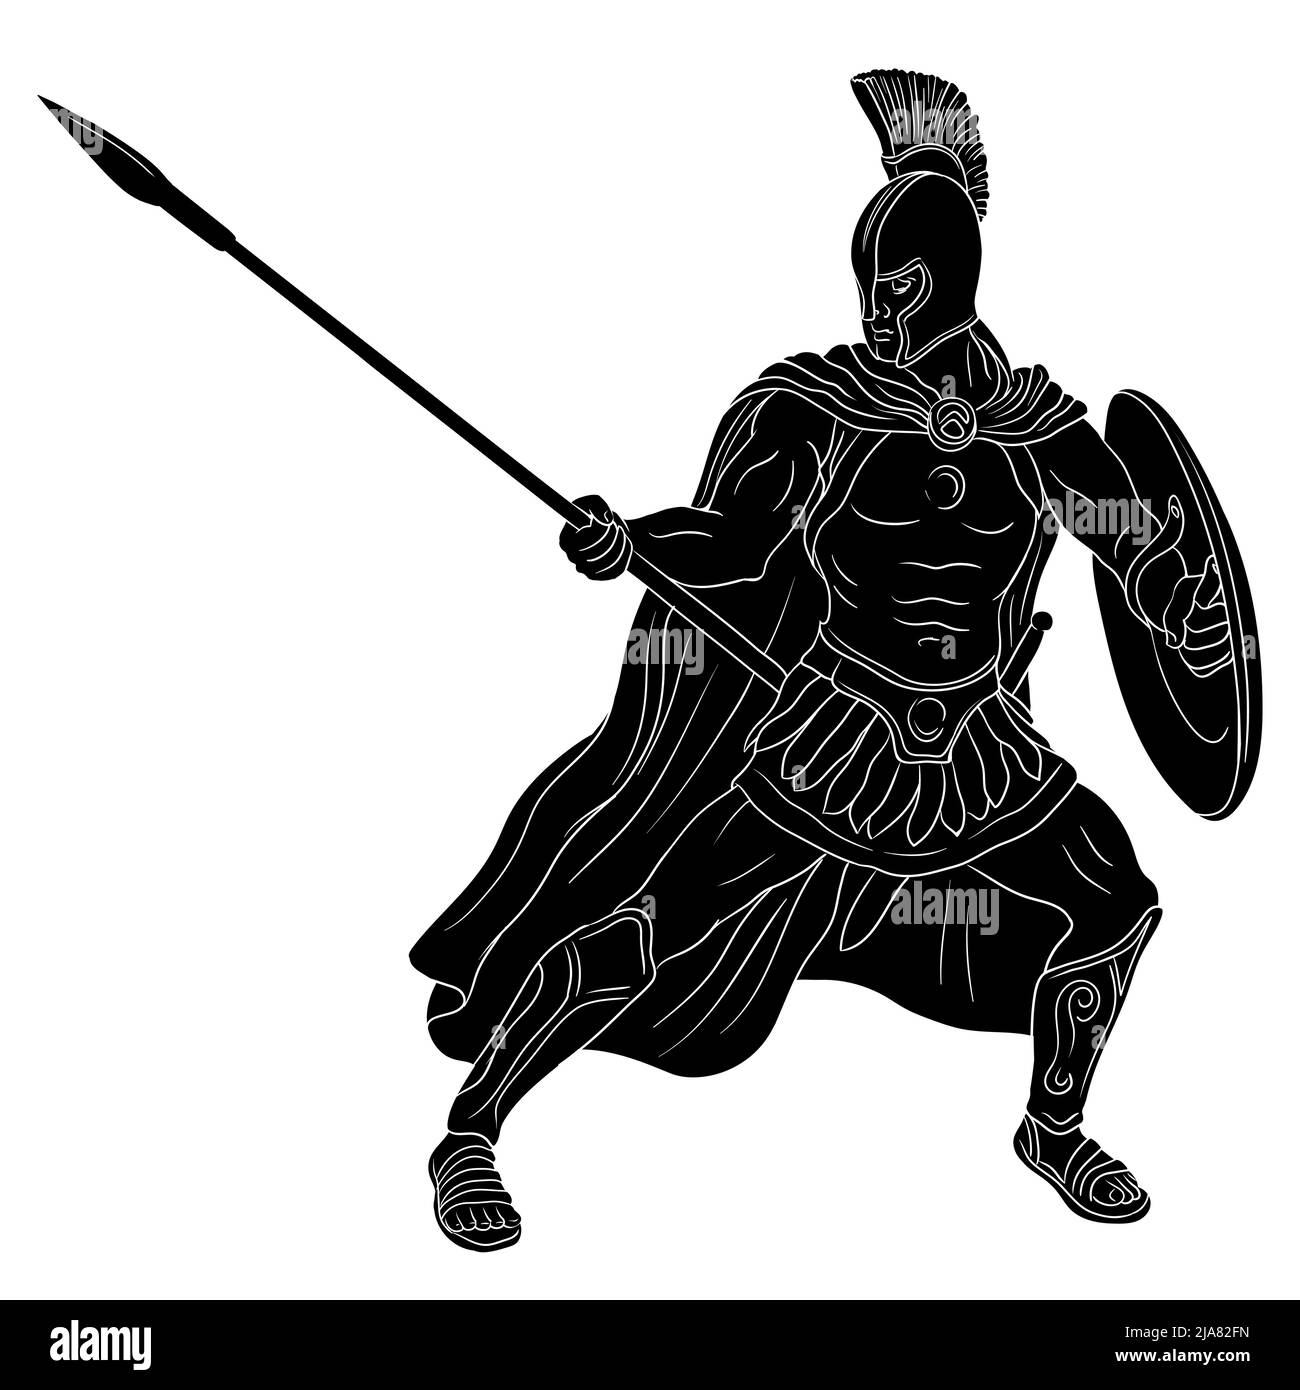 Ancient Roman warrior legionary with a spear and shield in his hands is standing ready to attack. Vector illustration isolated on white background. Stock Vector